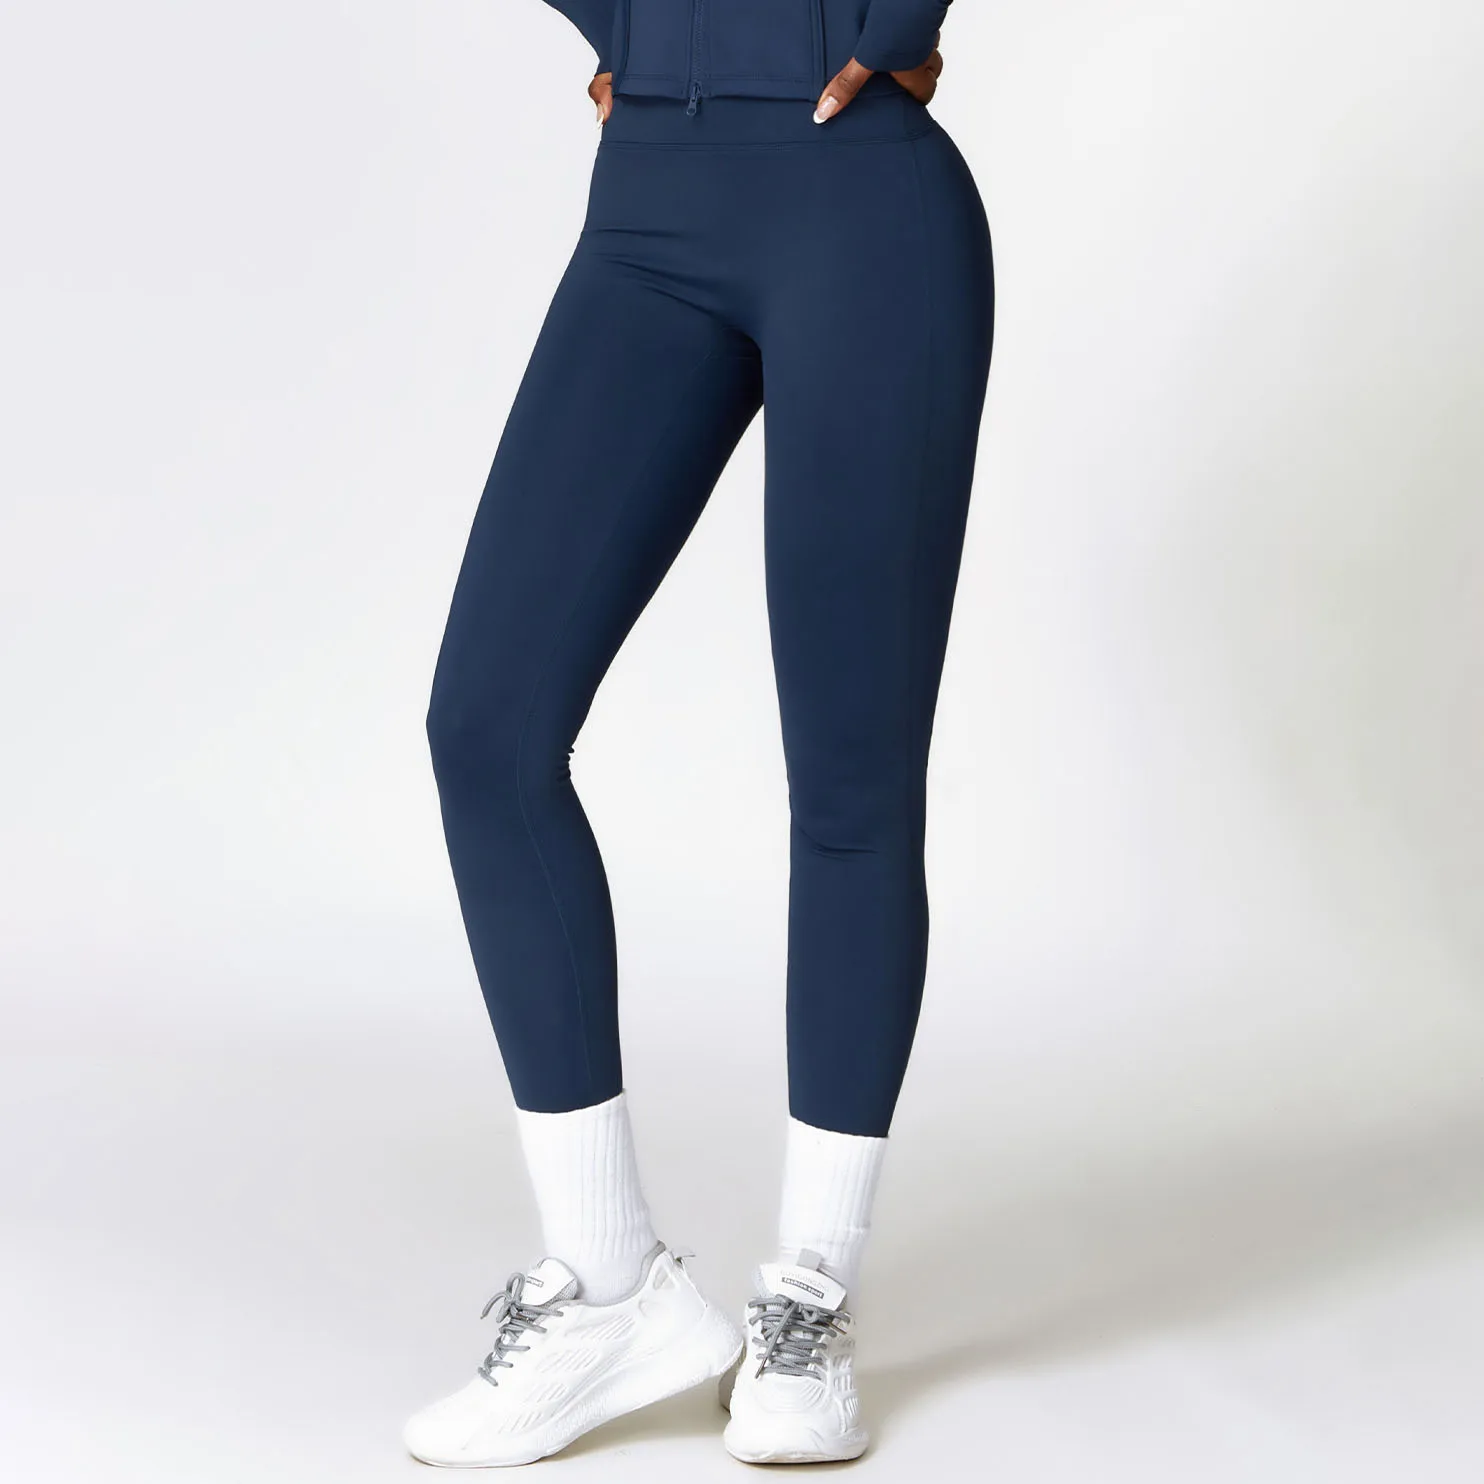 YIYI High Waist Comfortable Workout Leggings Girls With Fleece Butt Lift Tights Pants Ladies Warm Leggings Women Extremely Thick